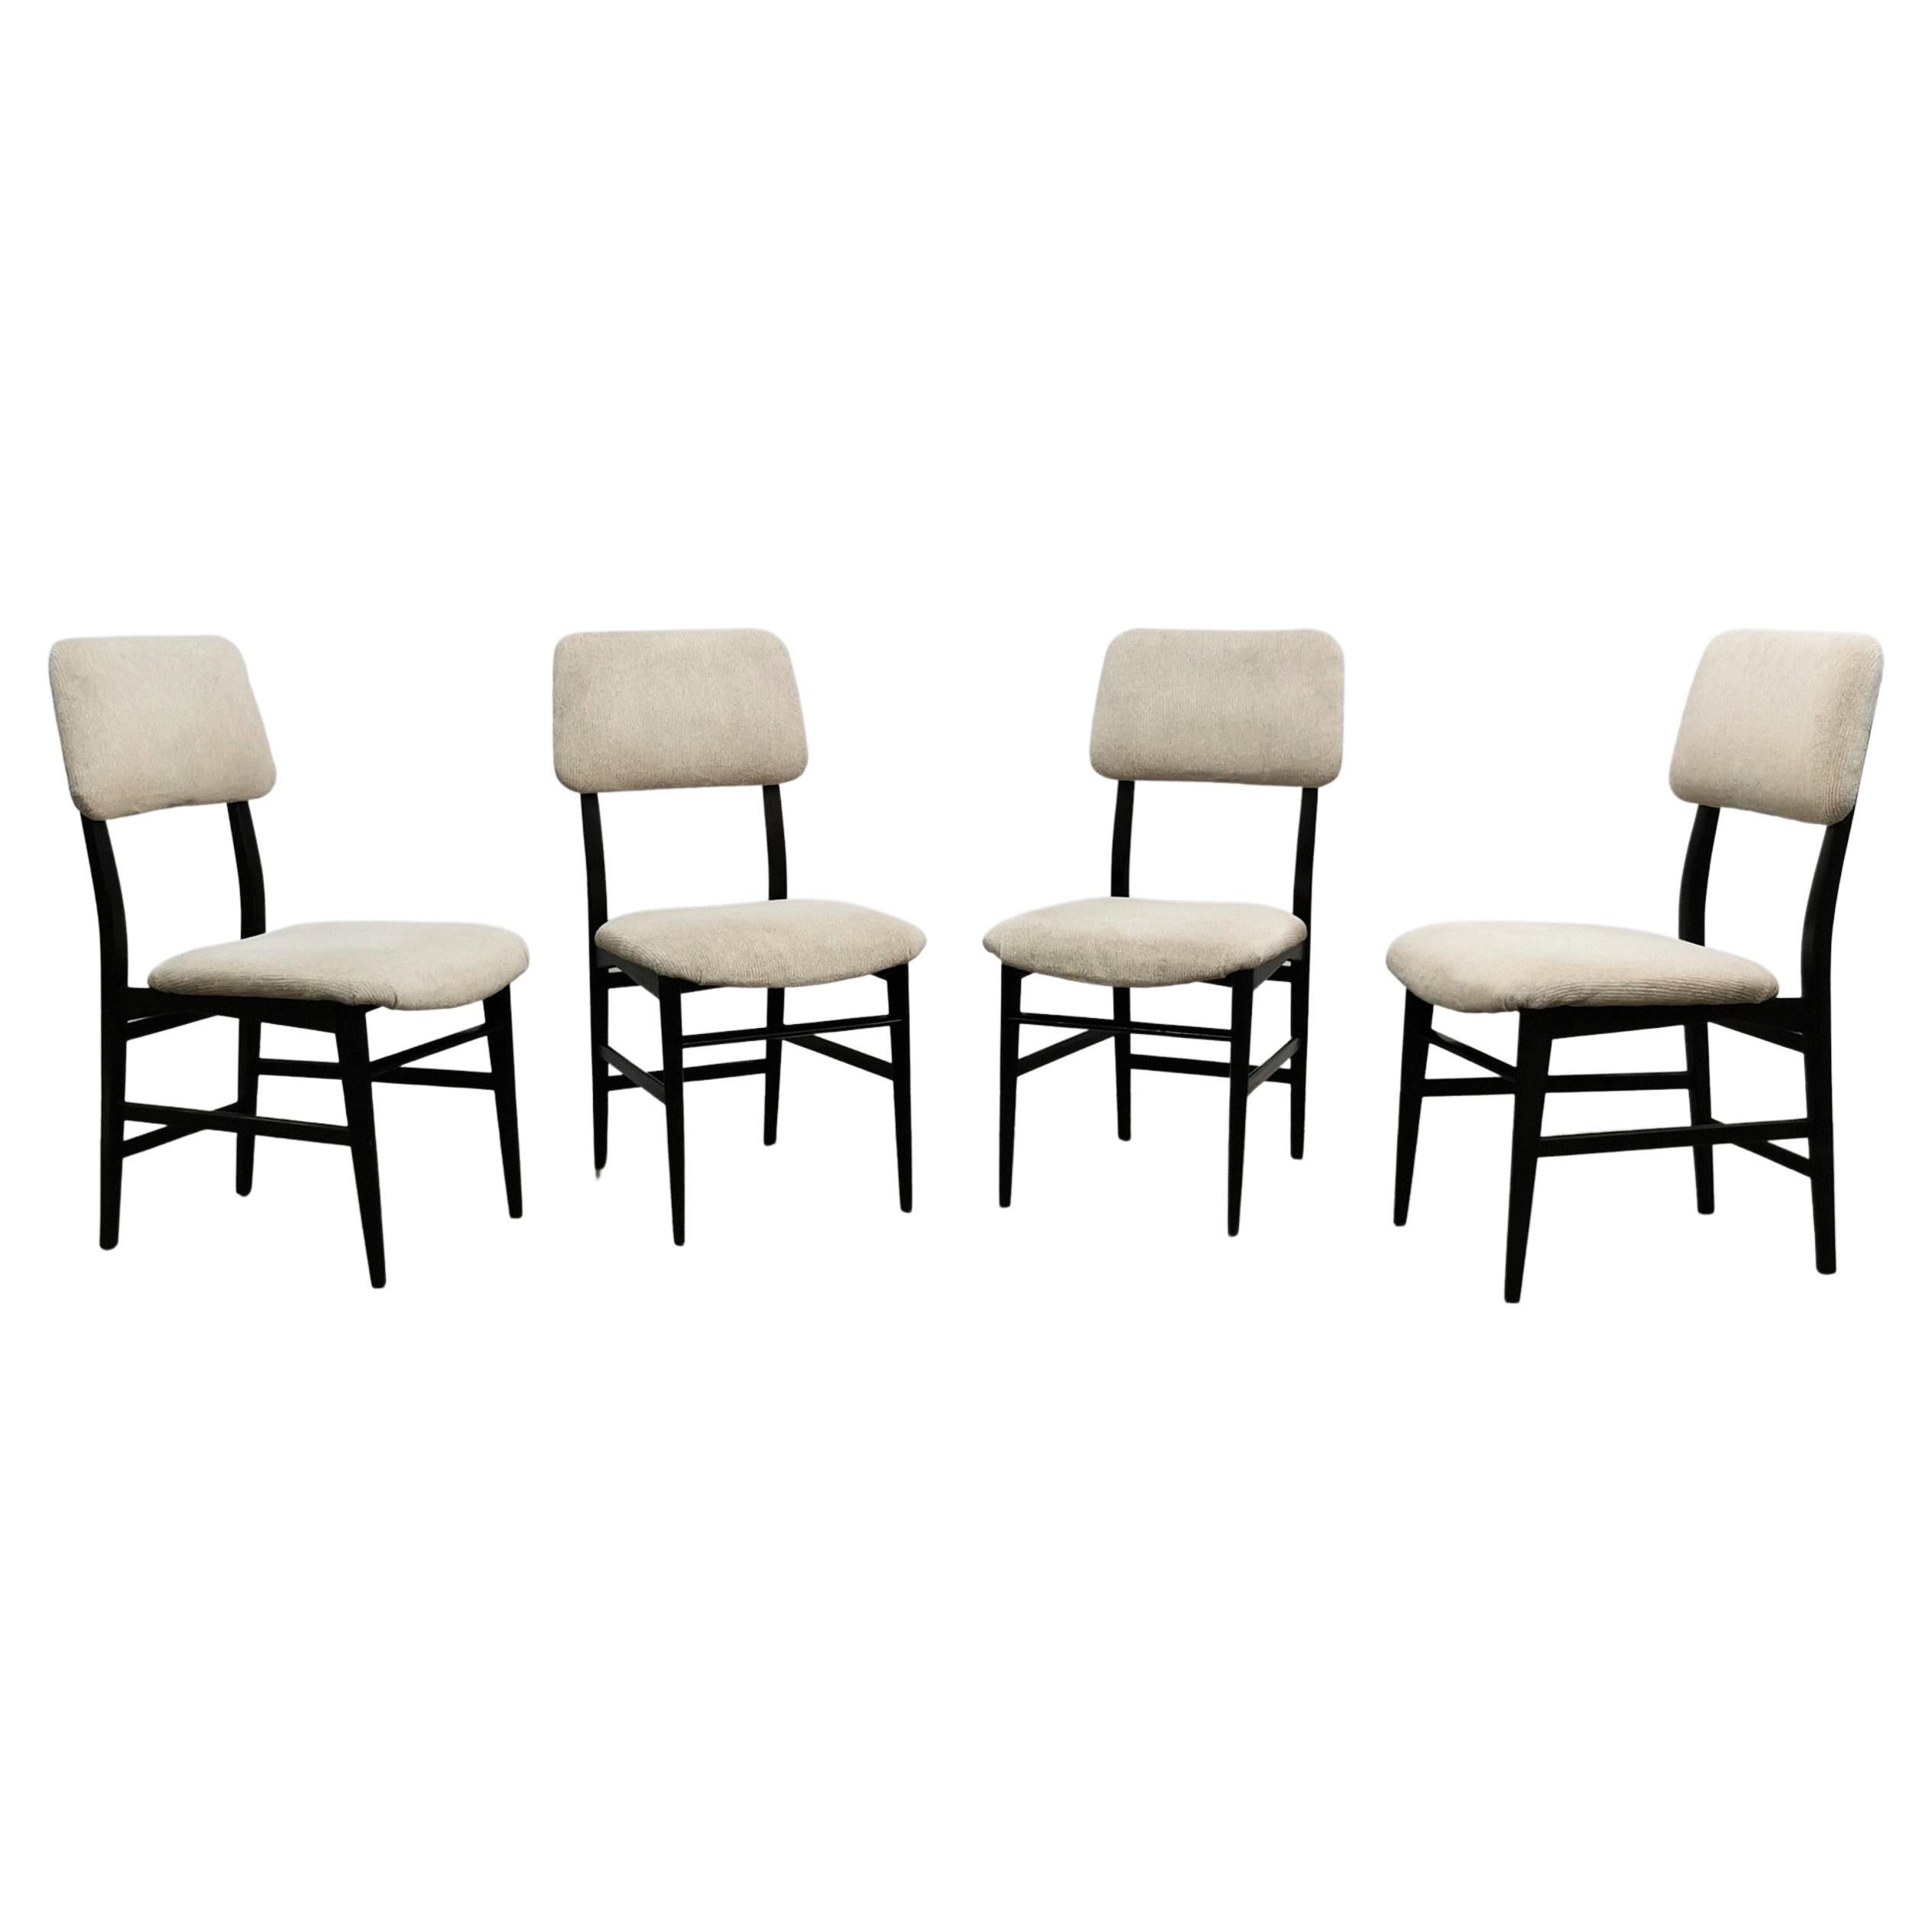 Set of 4 chairs with sinuous shapes designed by the designer Edmondo Palutari and produced by the Italian company Dassi in the 1950s. Each single chair was made of dark wood with seat and back in striped velvet in shades of cream and light